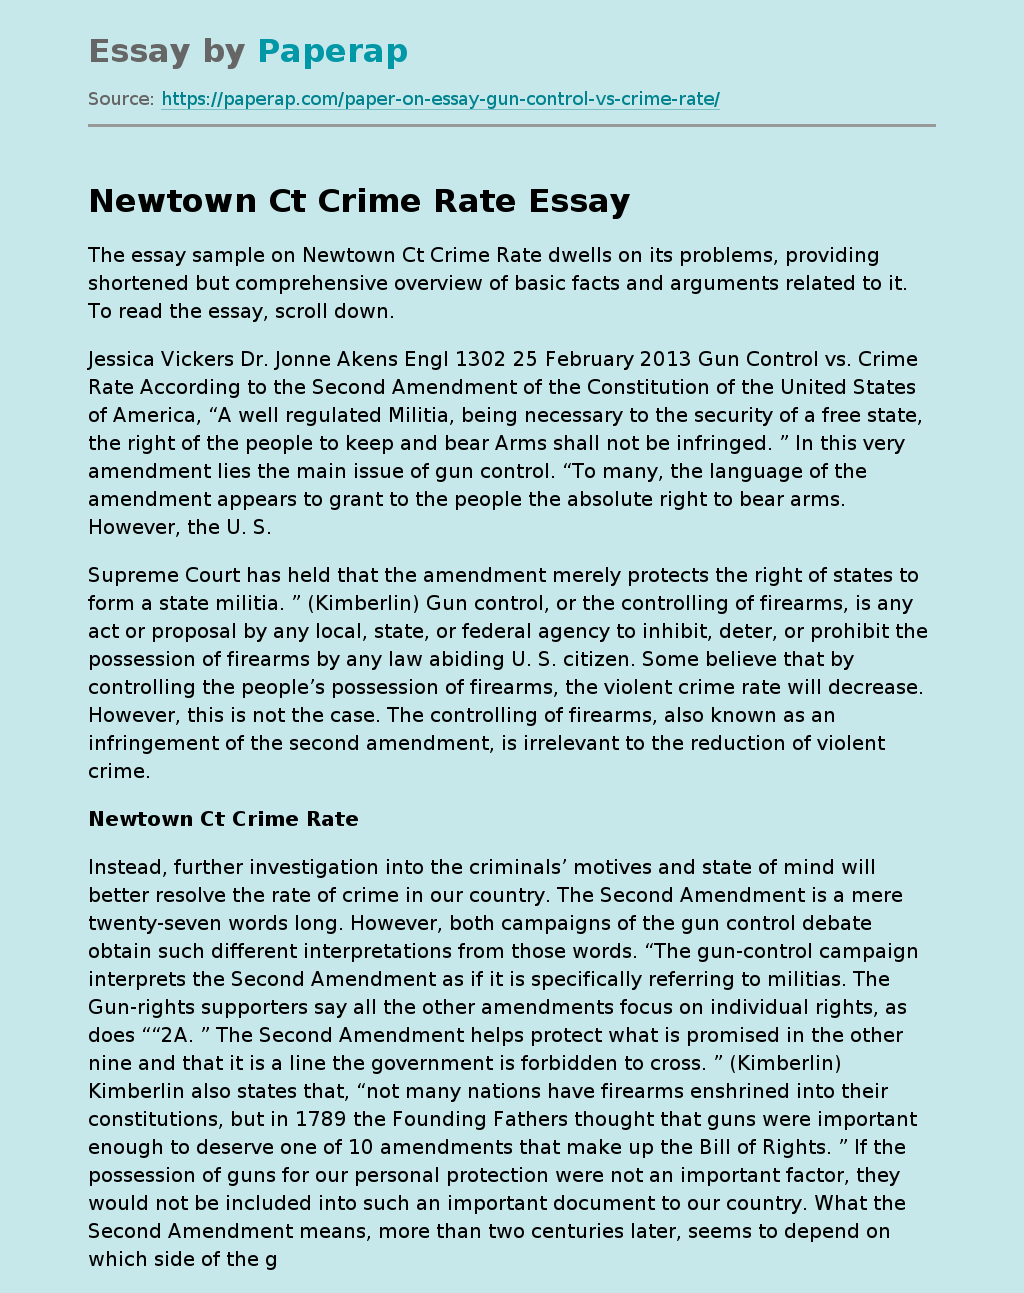 Essay Sample on Newtown CT Crime Rate